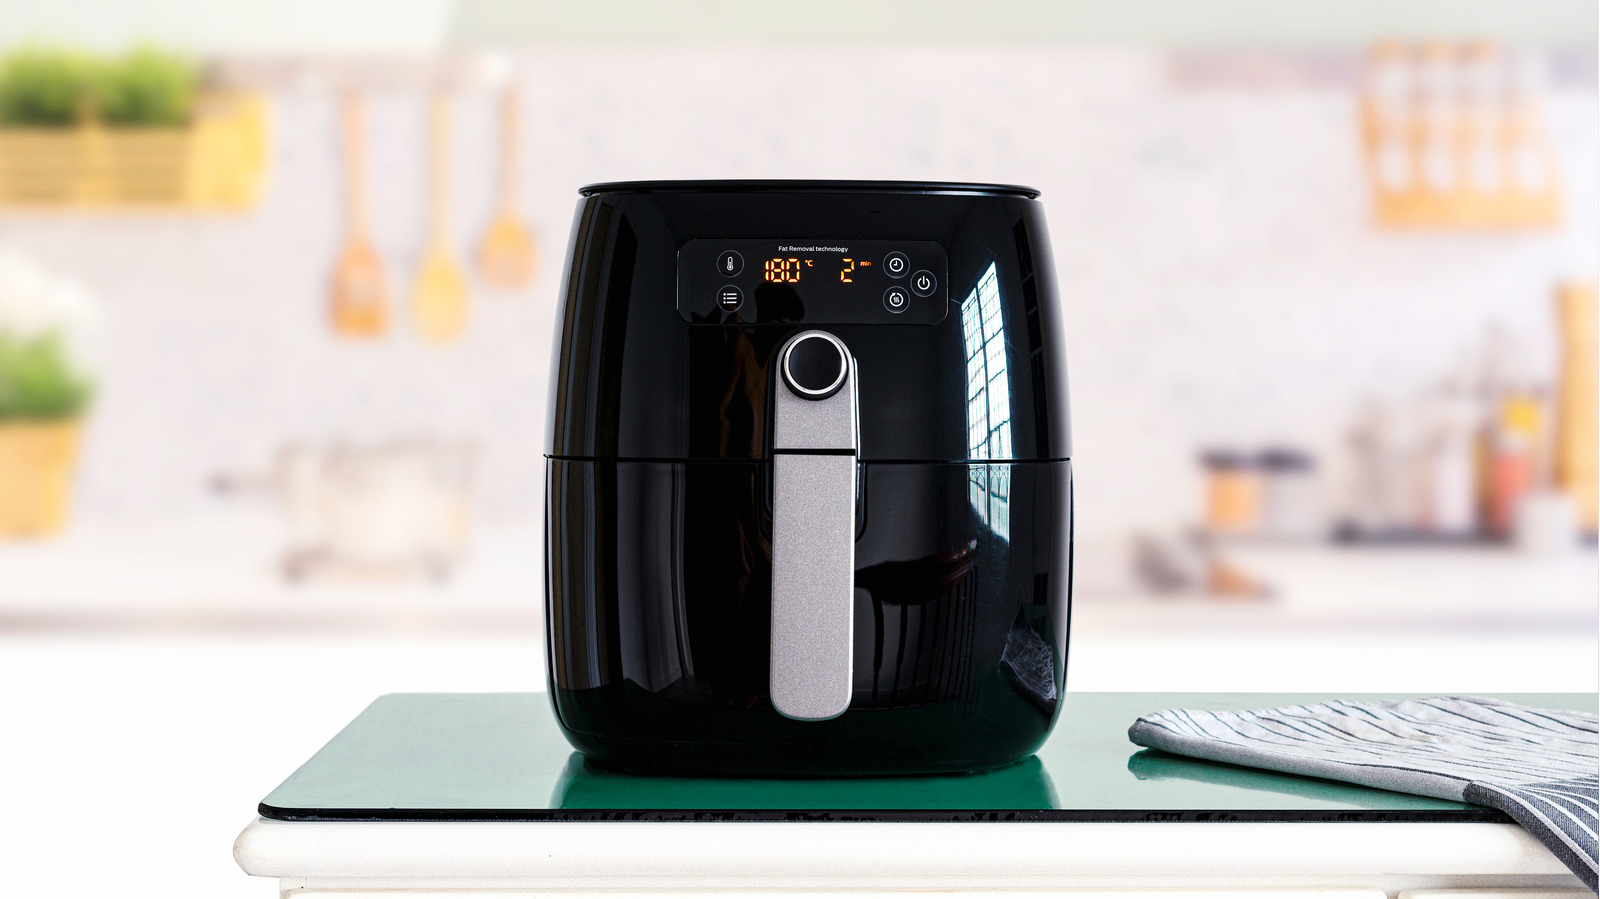 https://www.mashed.com/img/gallery/heres-everything-you-need-to-know-about-your-air-fryer/l-intro-1635372547.jpg